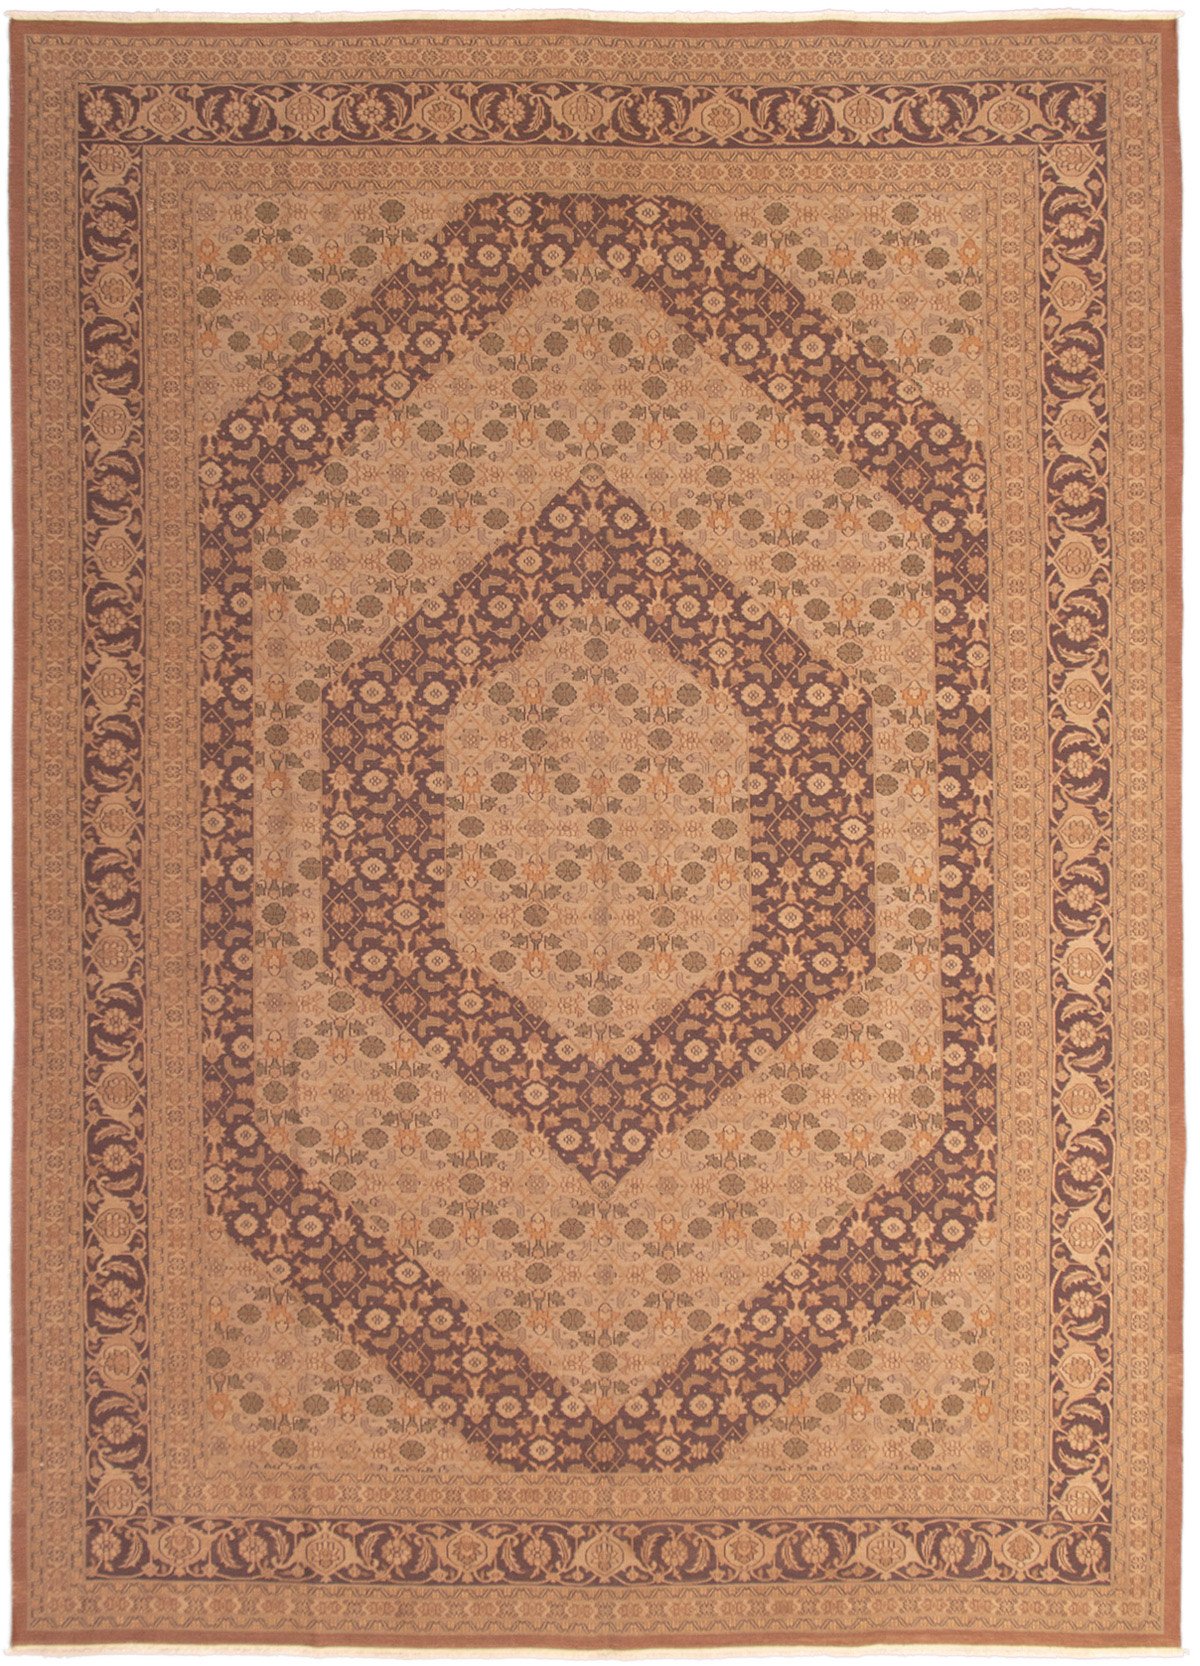 Hand woven Dynasty Tan Wool Tapestry Kilim 9'6" x 13'6" Size: 9'6" x 13'6"  